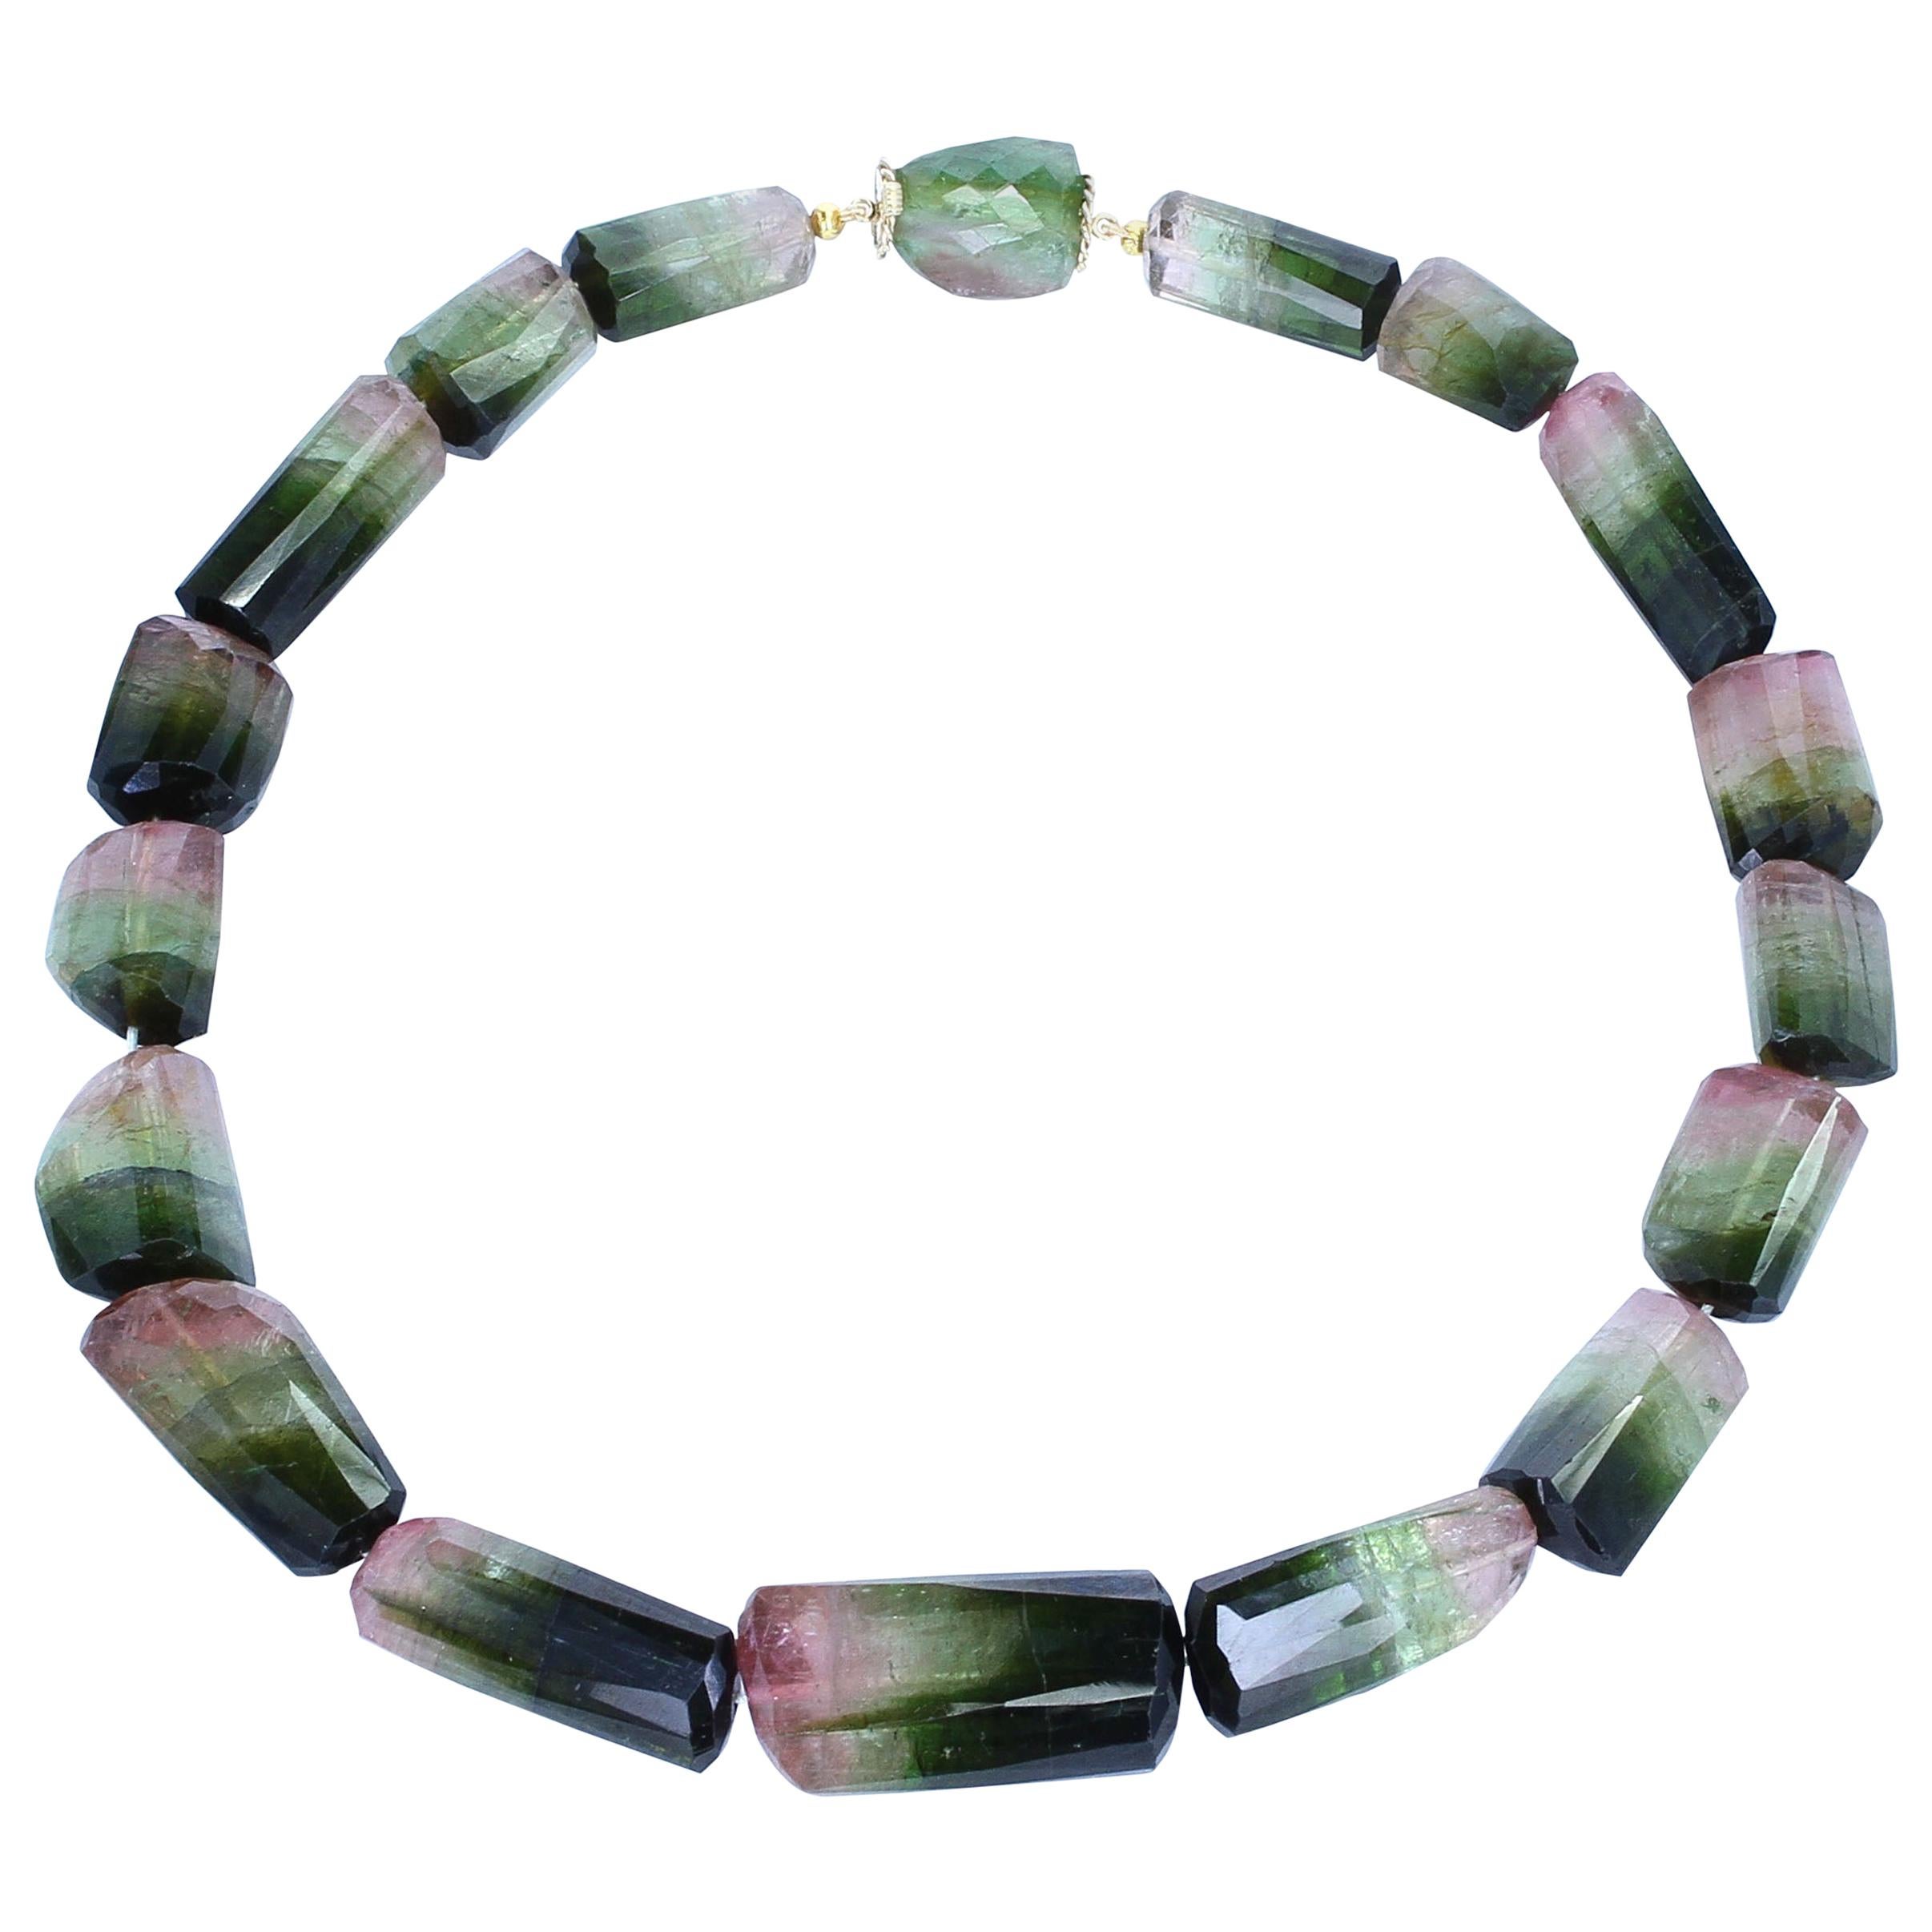 Large Faceted Rectangular Bi-Color Tourmaline Beads with a Tourmaline Clasp For Sale